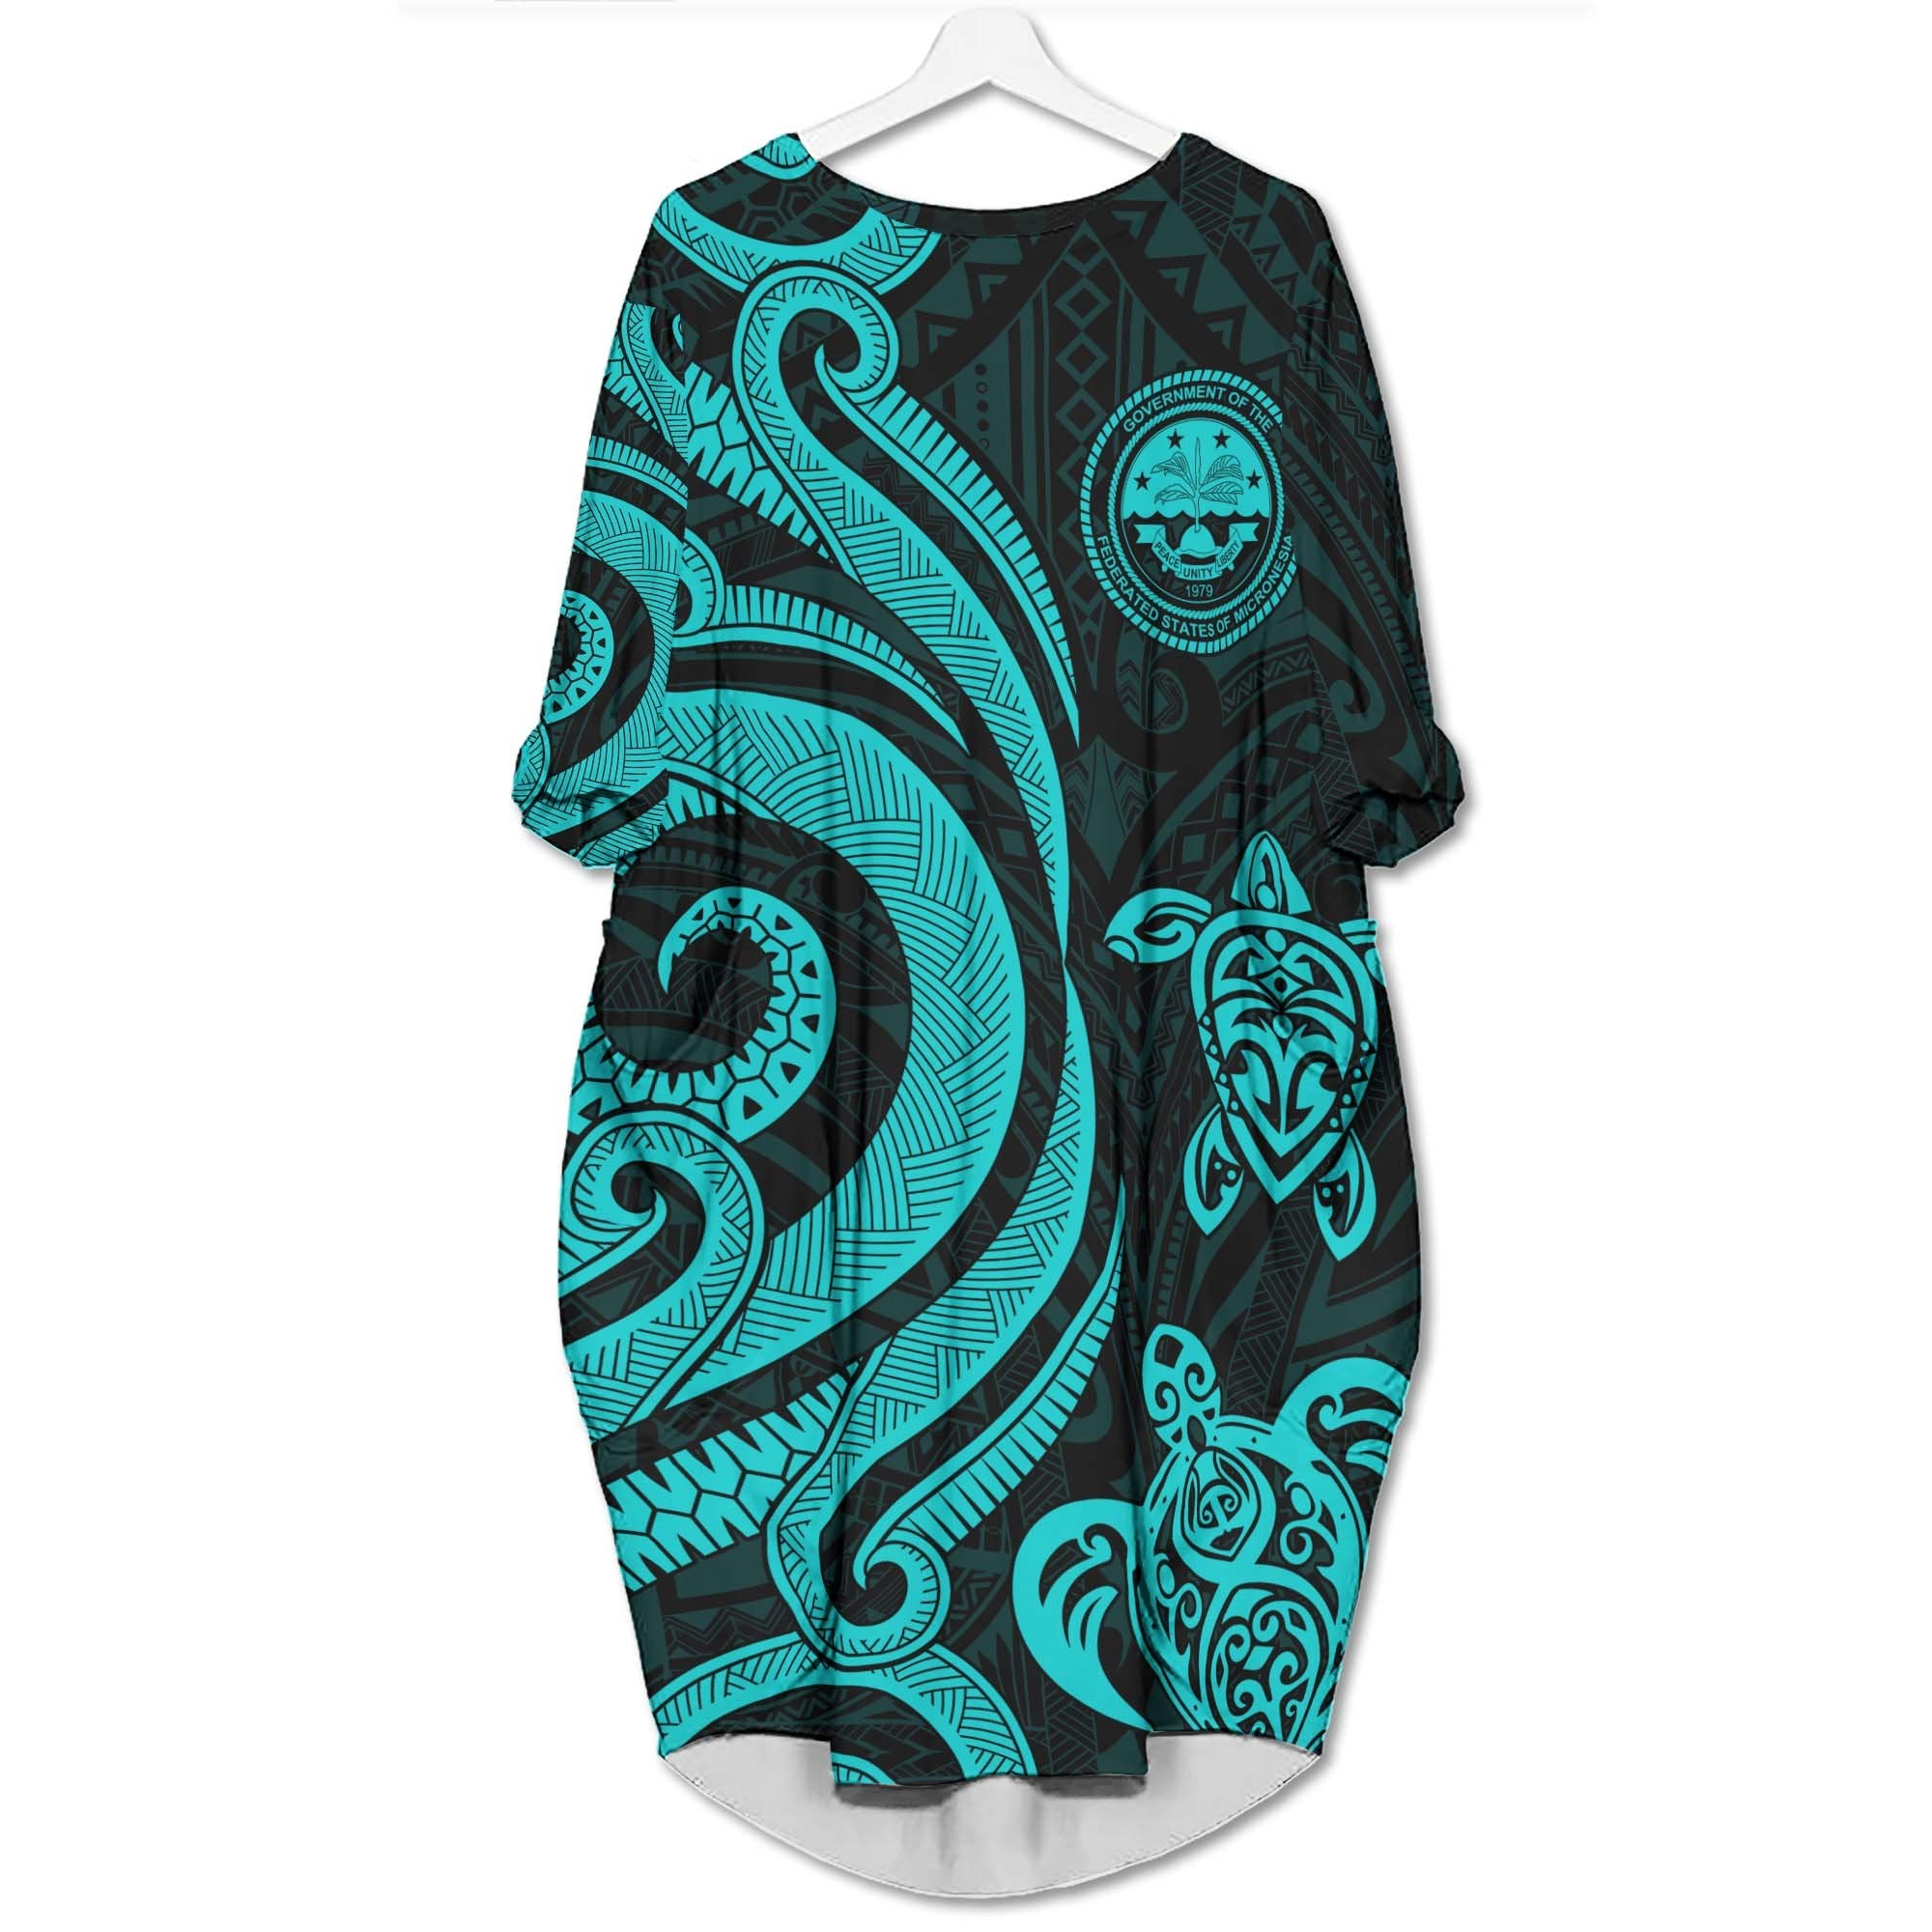 Federated States of Micronesia Batwing Pocket Dress - Turquoise Tentacle Turtle Women Turquoise - Polynesian Pride